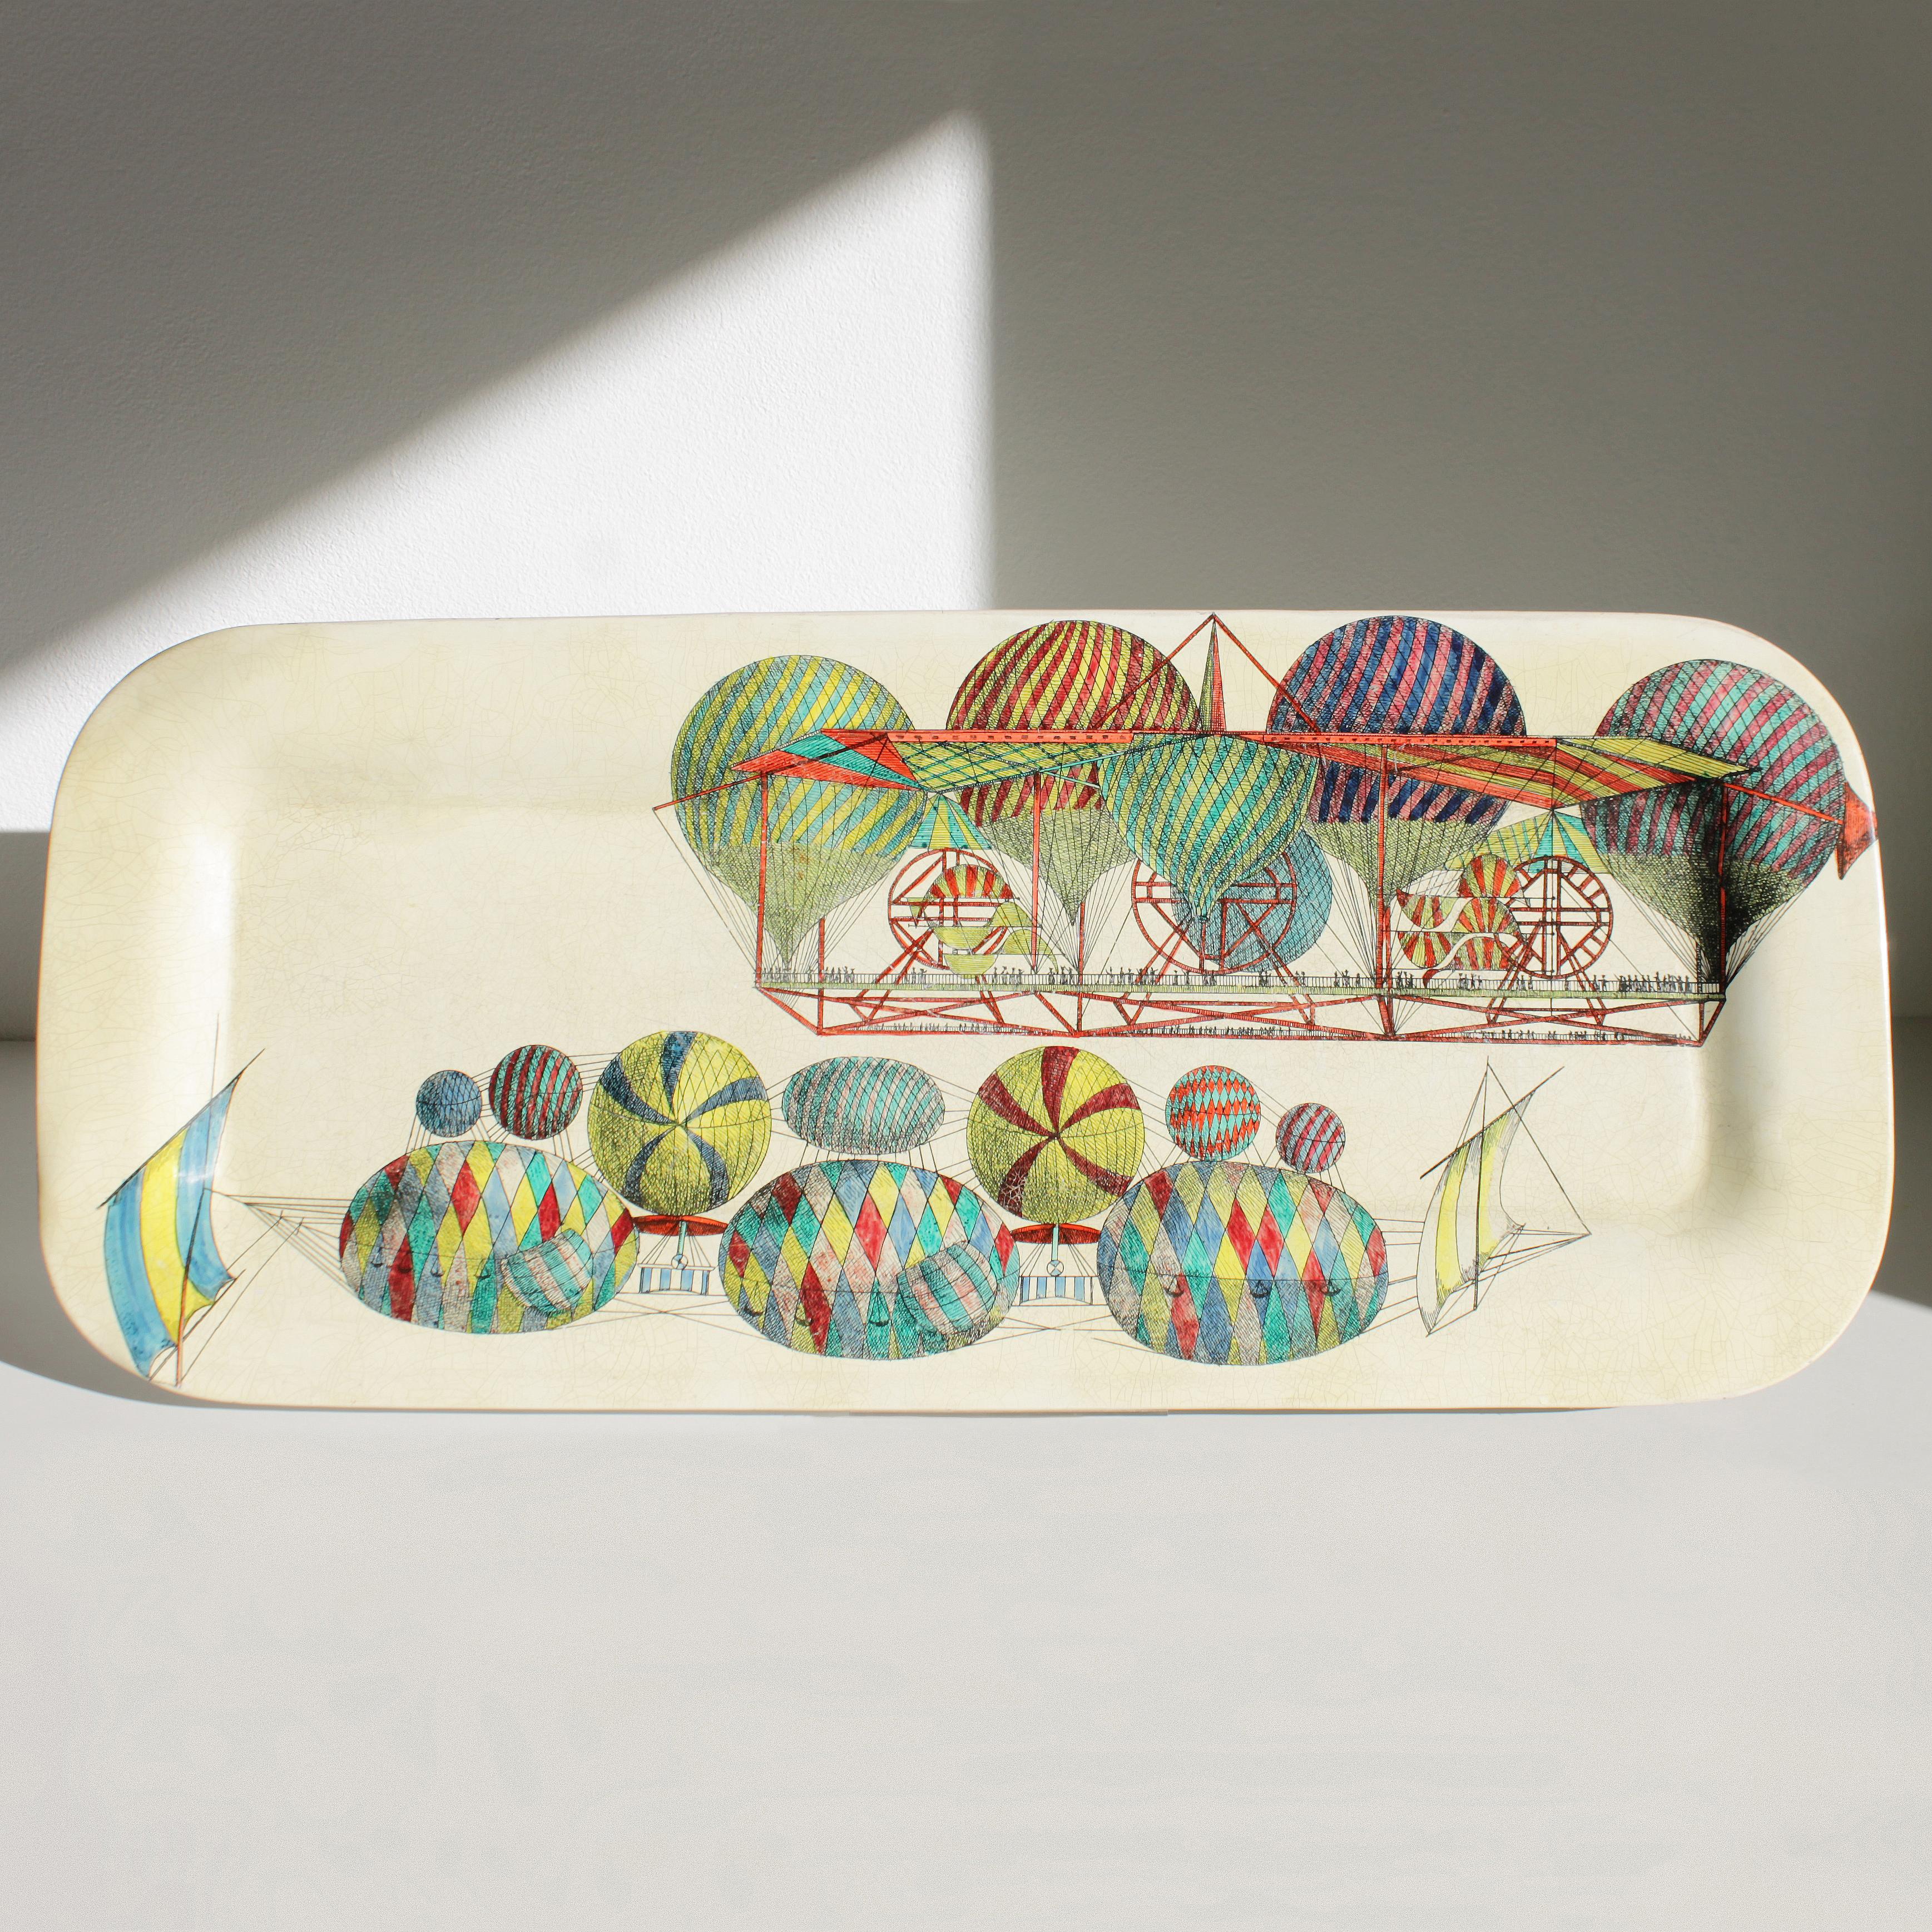 Original metal tray by Piero Fornasetti, Milano Italy. This is a rare first production called 'Palloni' (hot-air balloons) from the early 1950s. Marked. 
Dimensions: length 23.6 in. (60 cm), width 10.0 inches (25,5 cm).

Piero Fornasetti